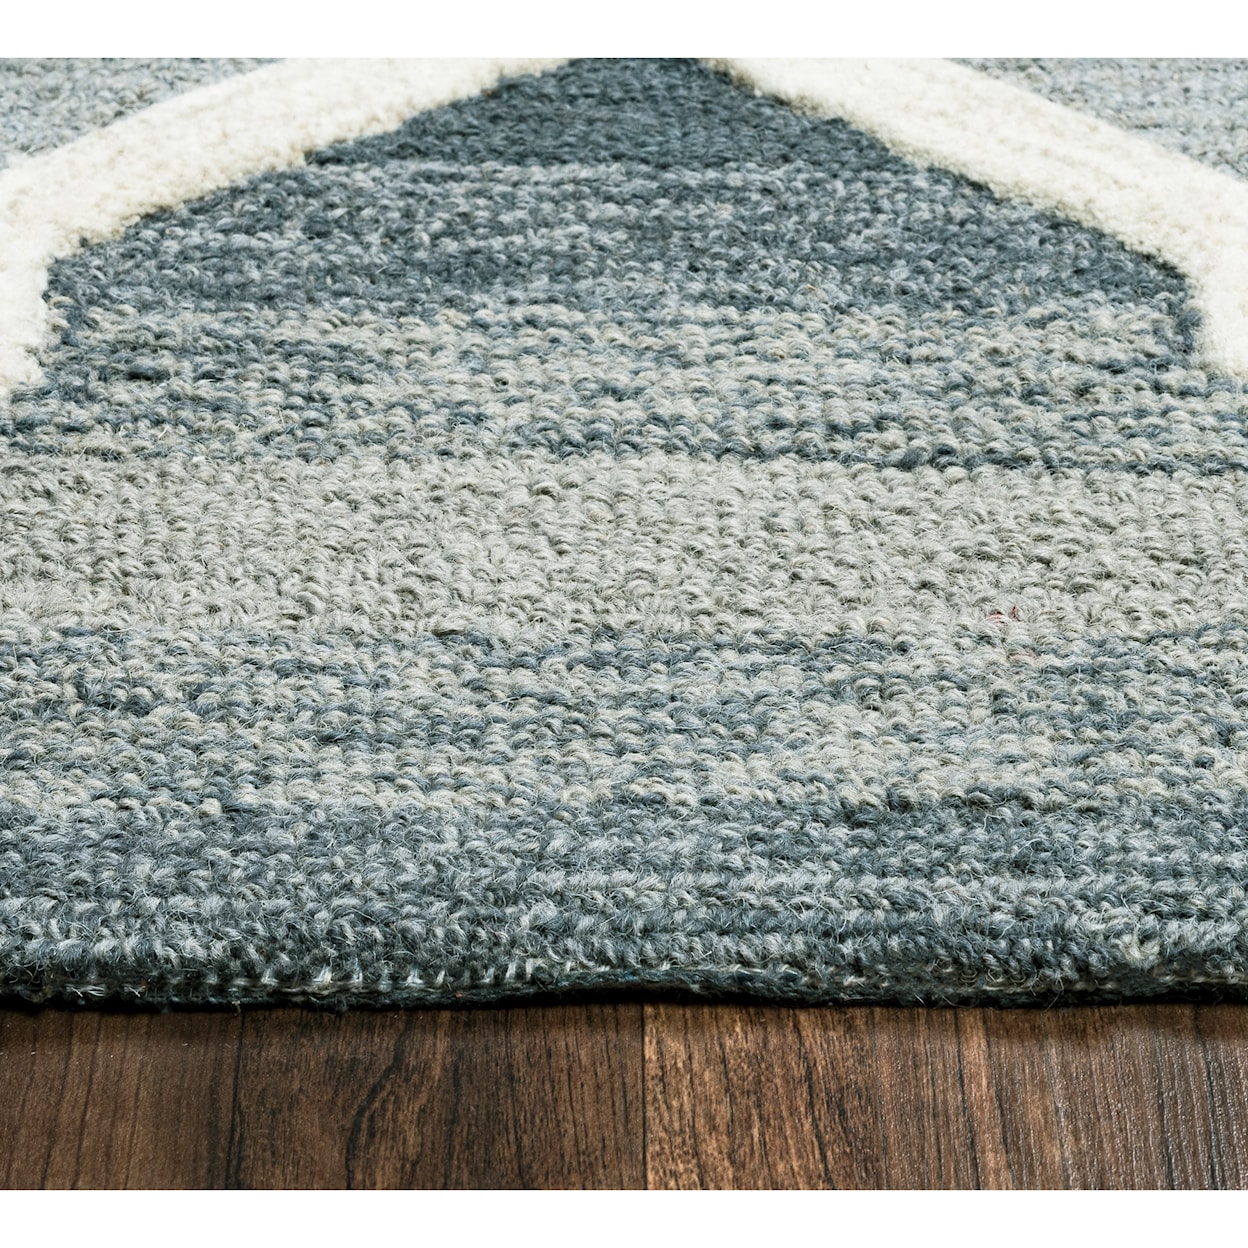 Rizzy Home Caterine 9' x 12' Rectangle Rug